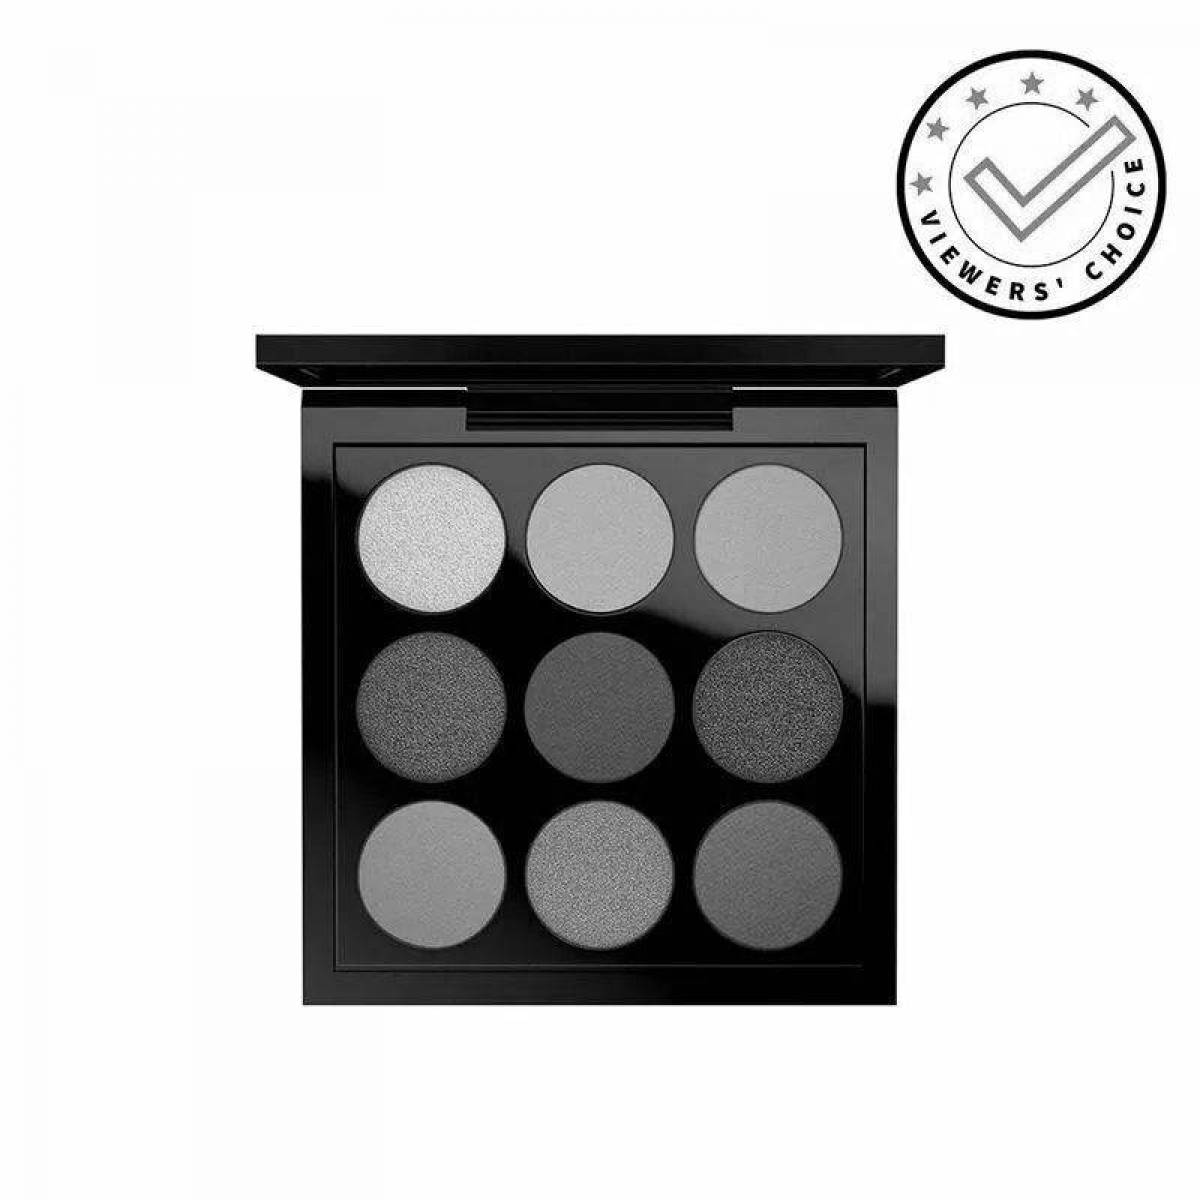 Bright colored eye shadow palette 9 colors